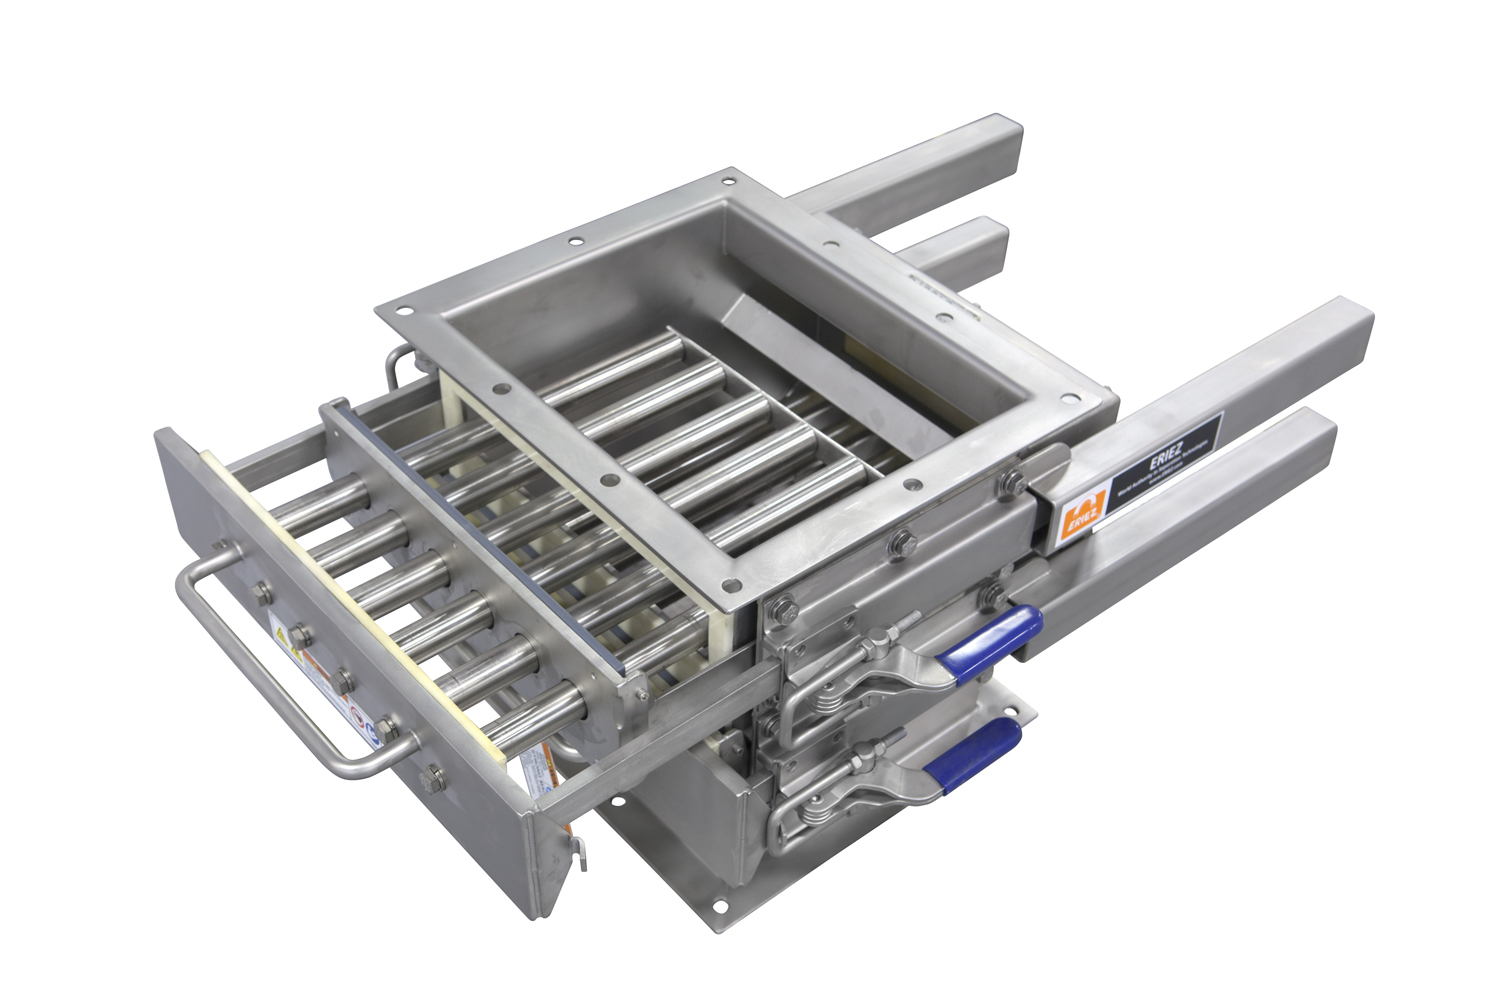 Magnetic sheet separator - All industrial manufacturers